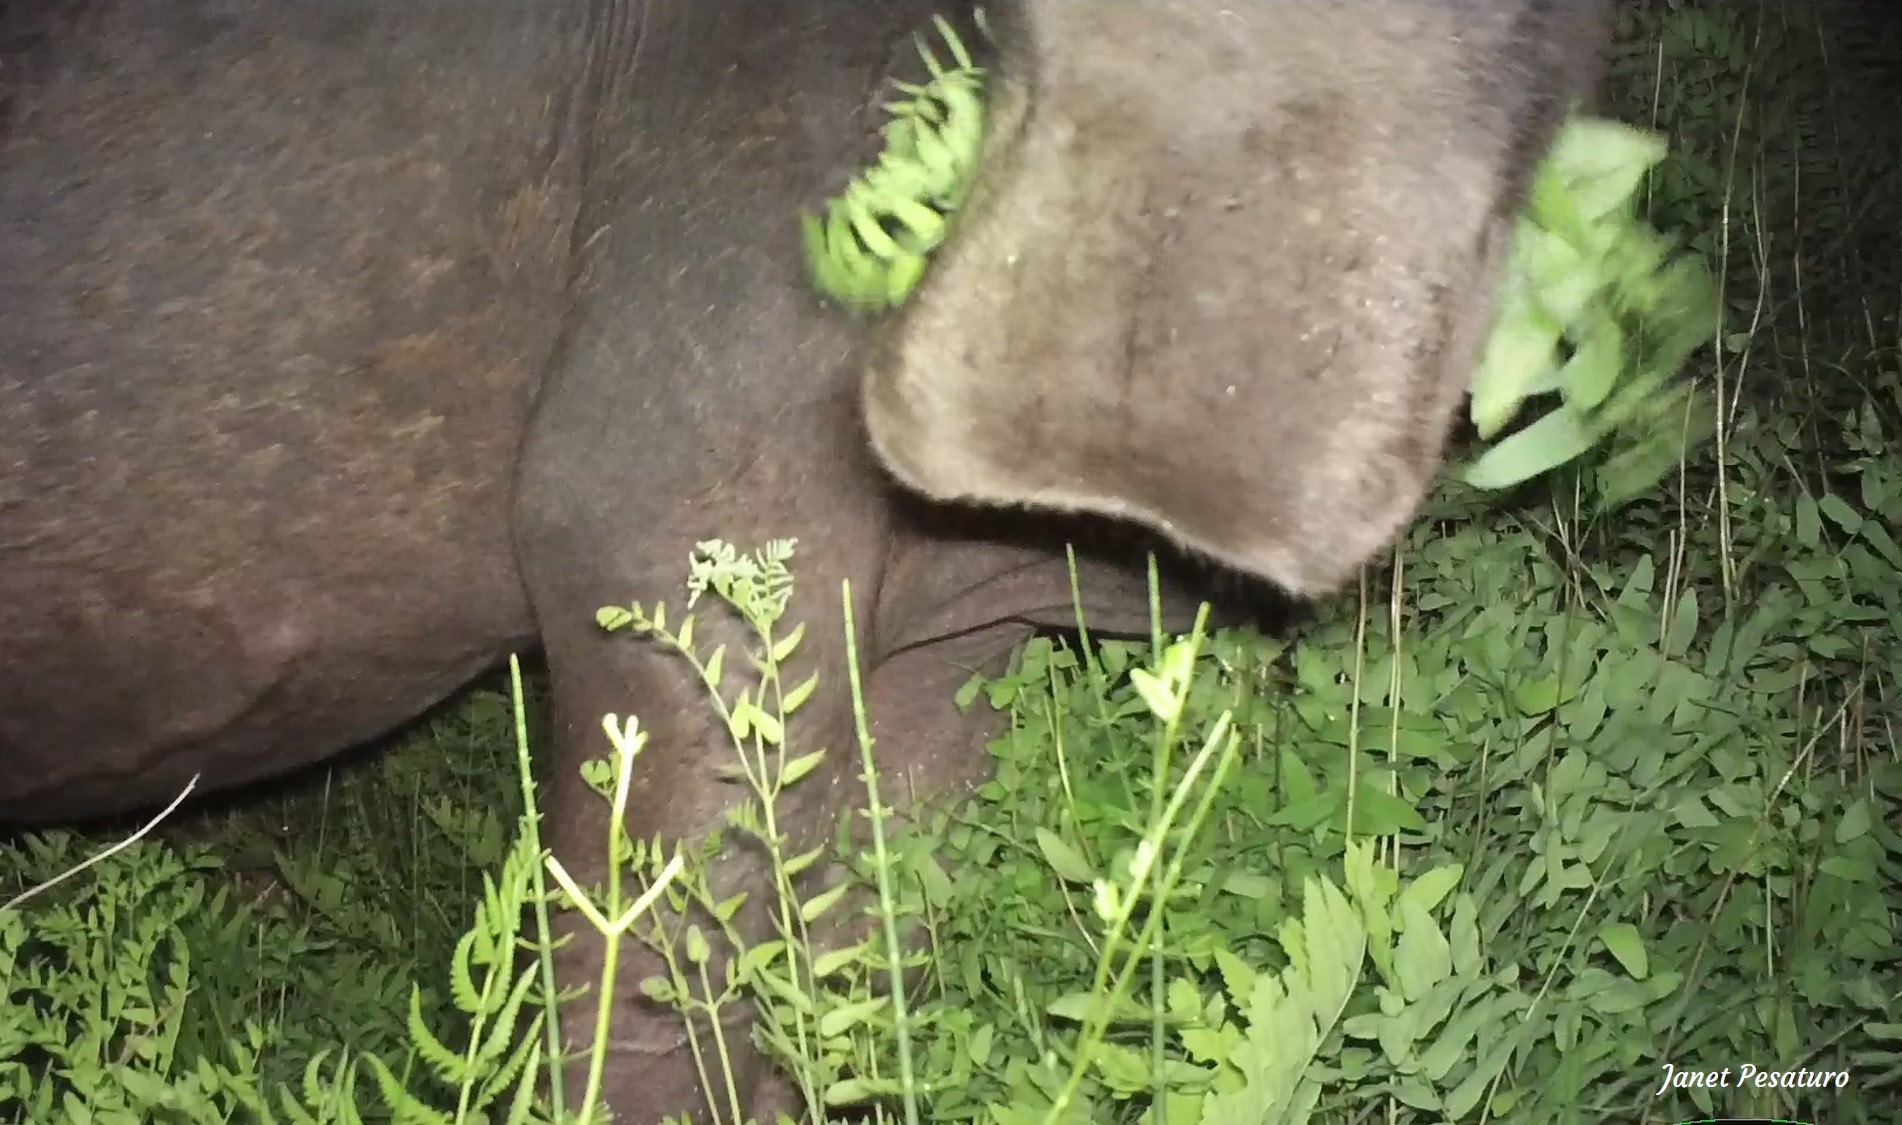 Moose eating royal fern, showing the feeding sign.